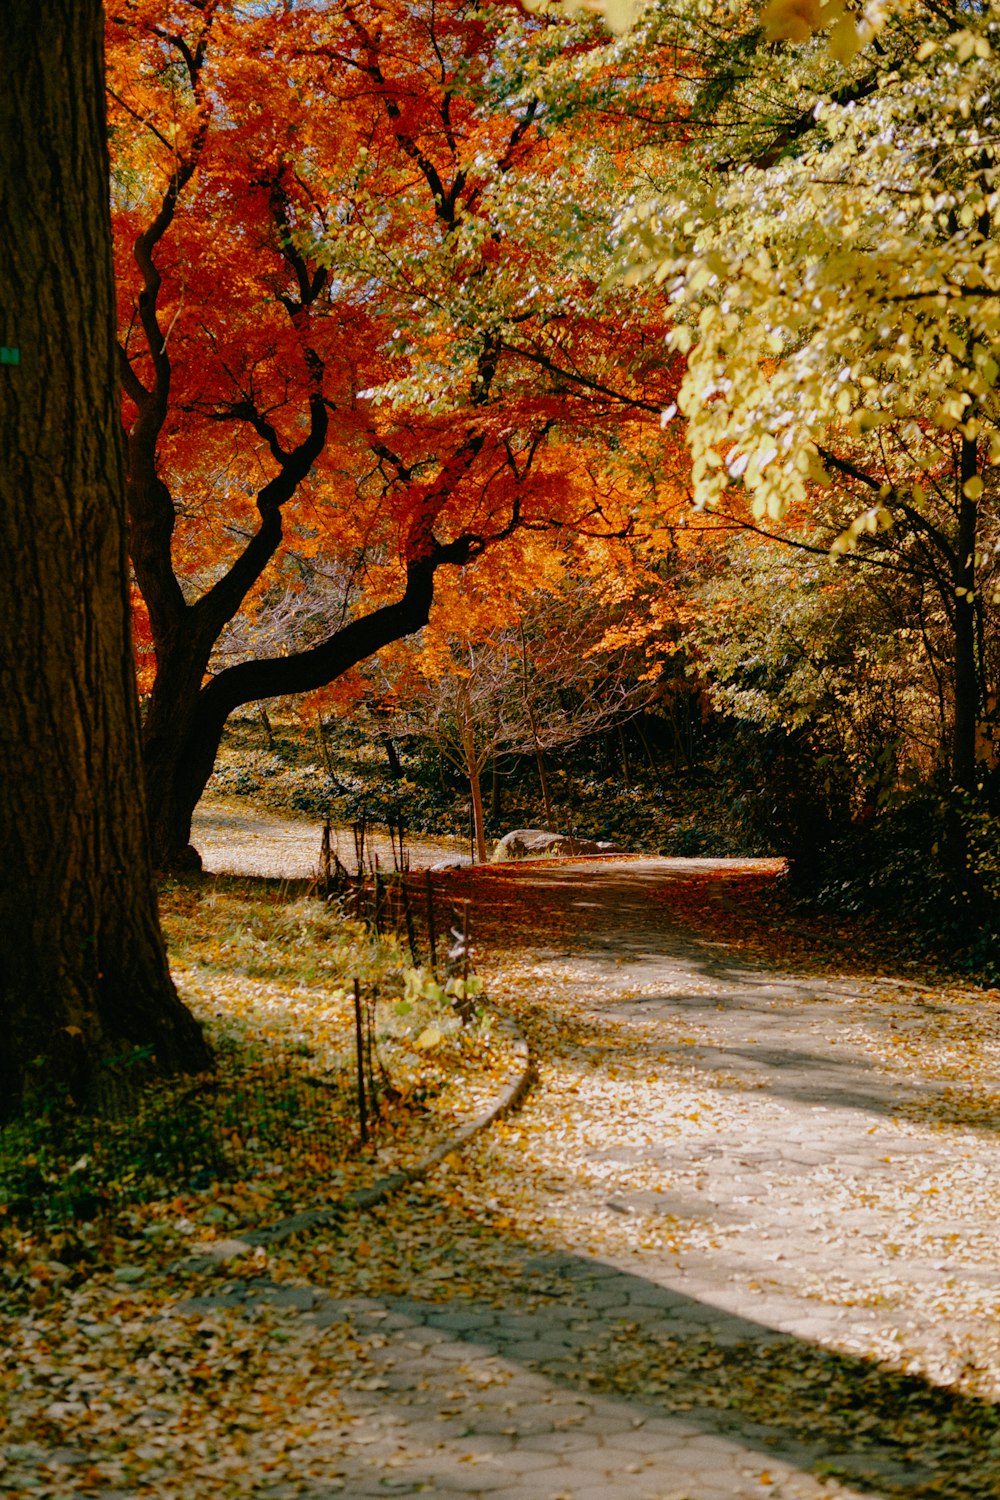 a tree with red leaves on it next to a dirt road